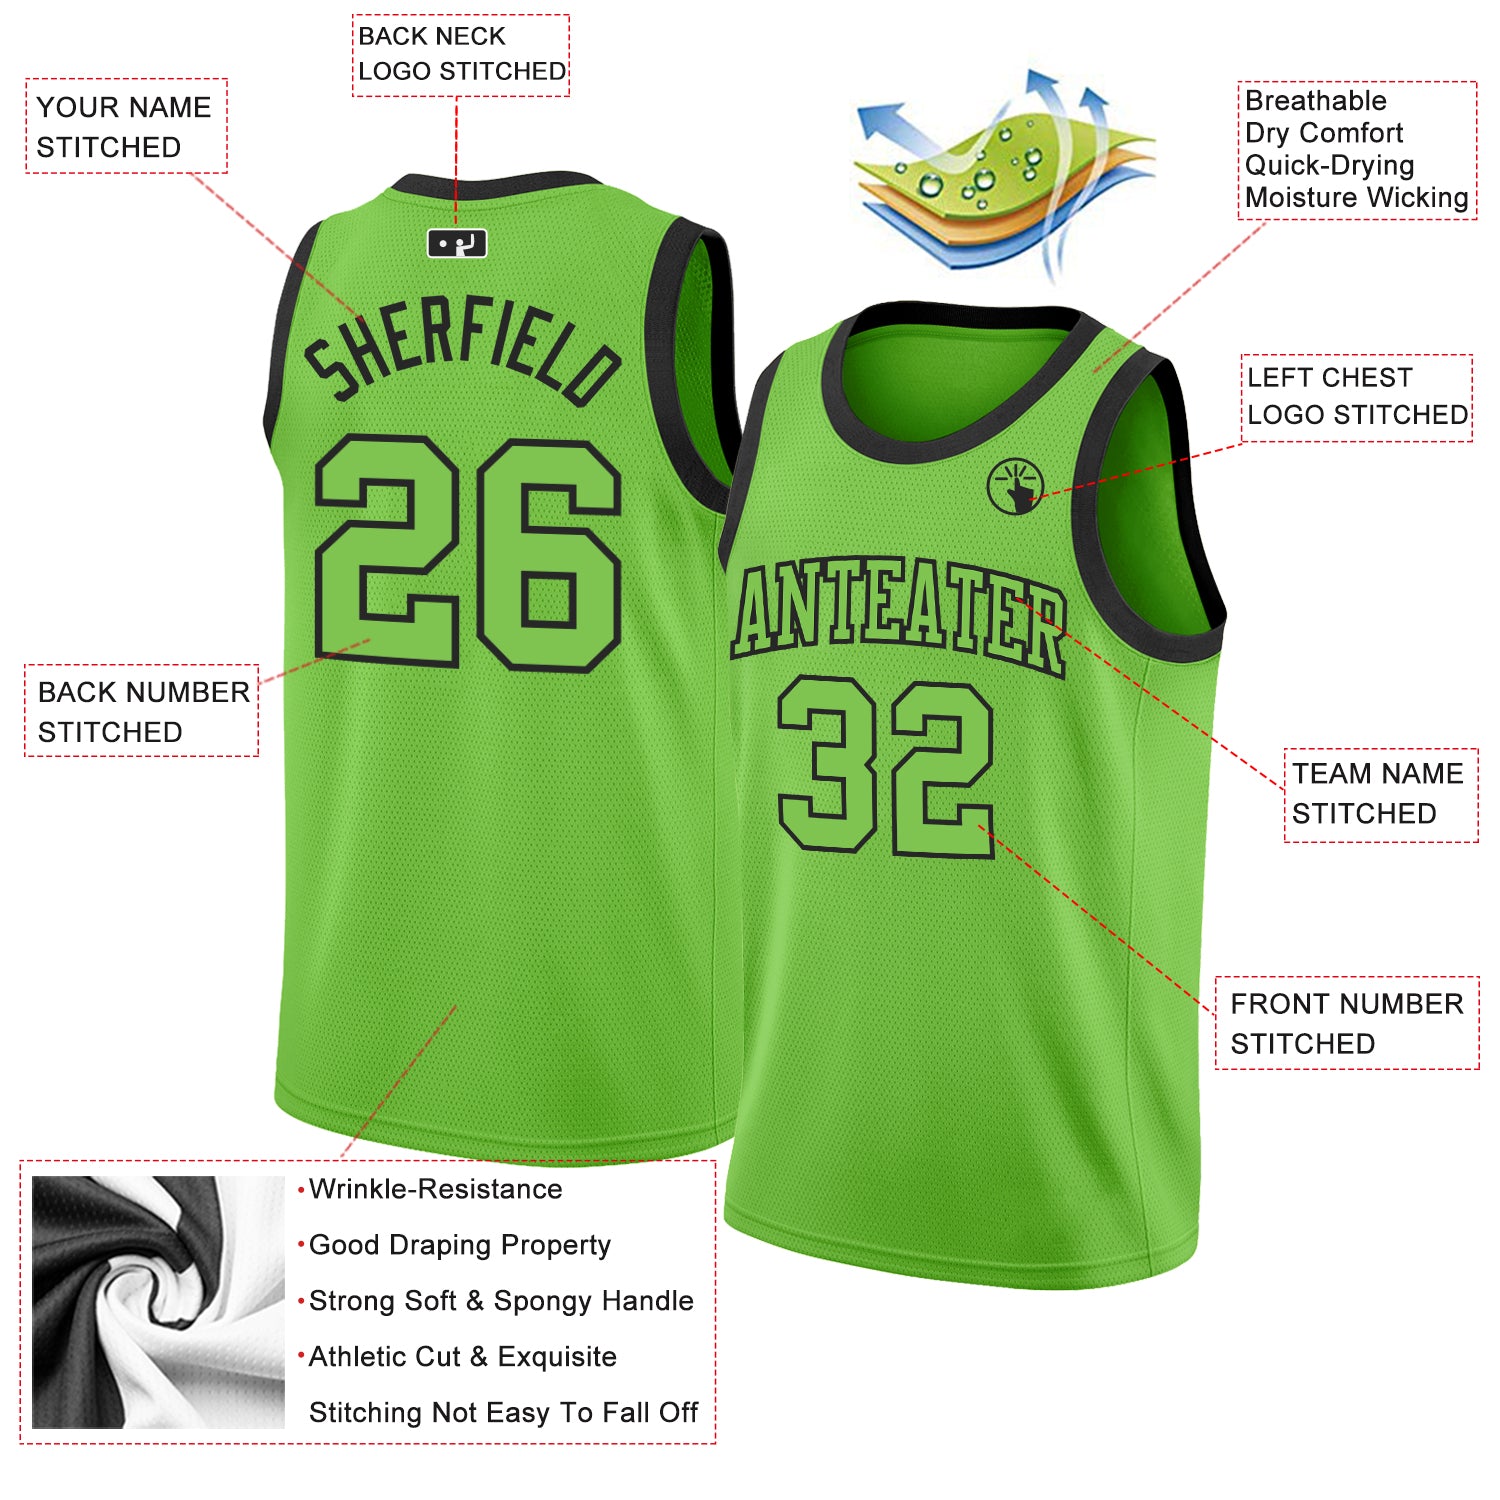 Custom Teal Basketball Jersey  Basketball jersey, Sport outfits,  Breathable fabric